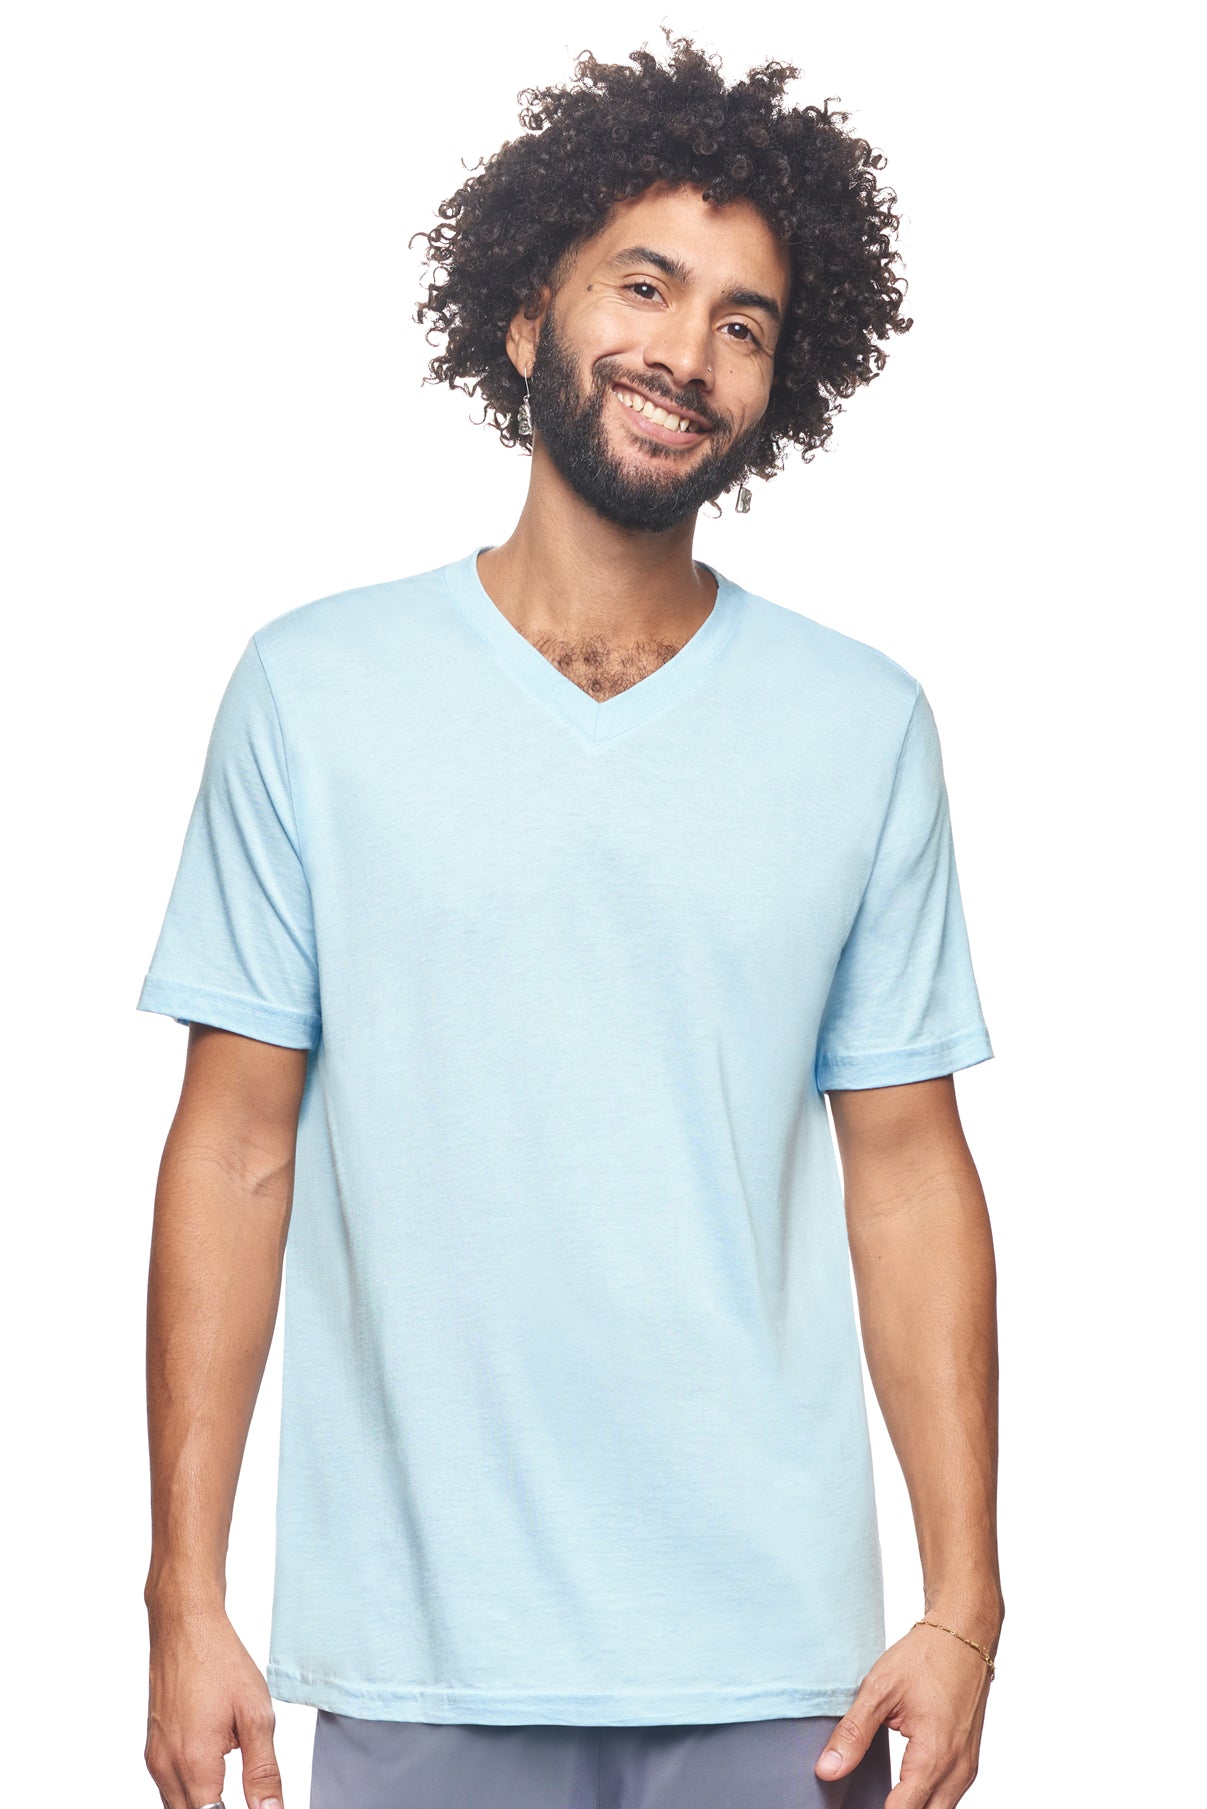 Expert Brand Retail Sustainable Eco-Friendly Apparel Micromodal Cotton Men's V-neck T-Shirt Made in USA light blue 2#color_light-blue